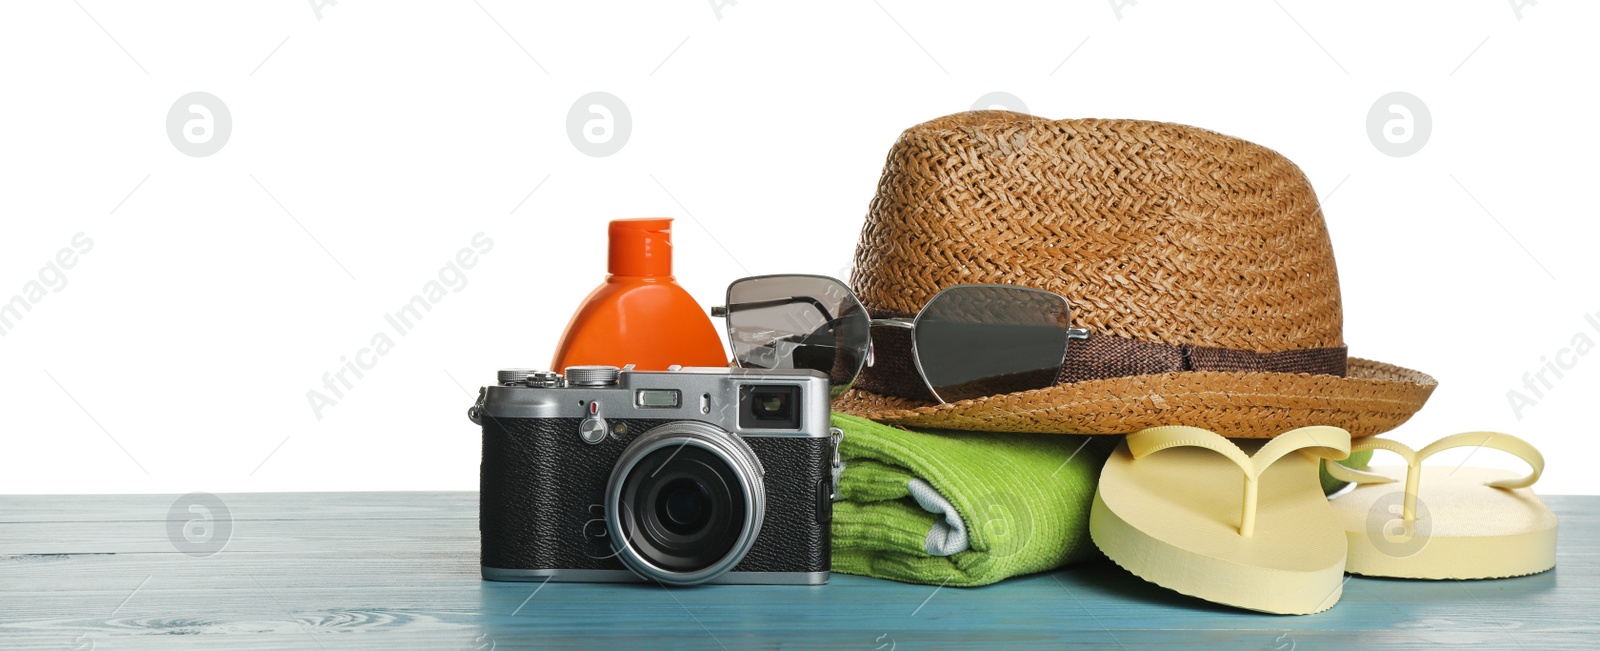 Photo of Different beach objects on turquoise wooden table against white background